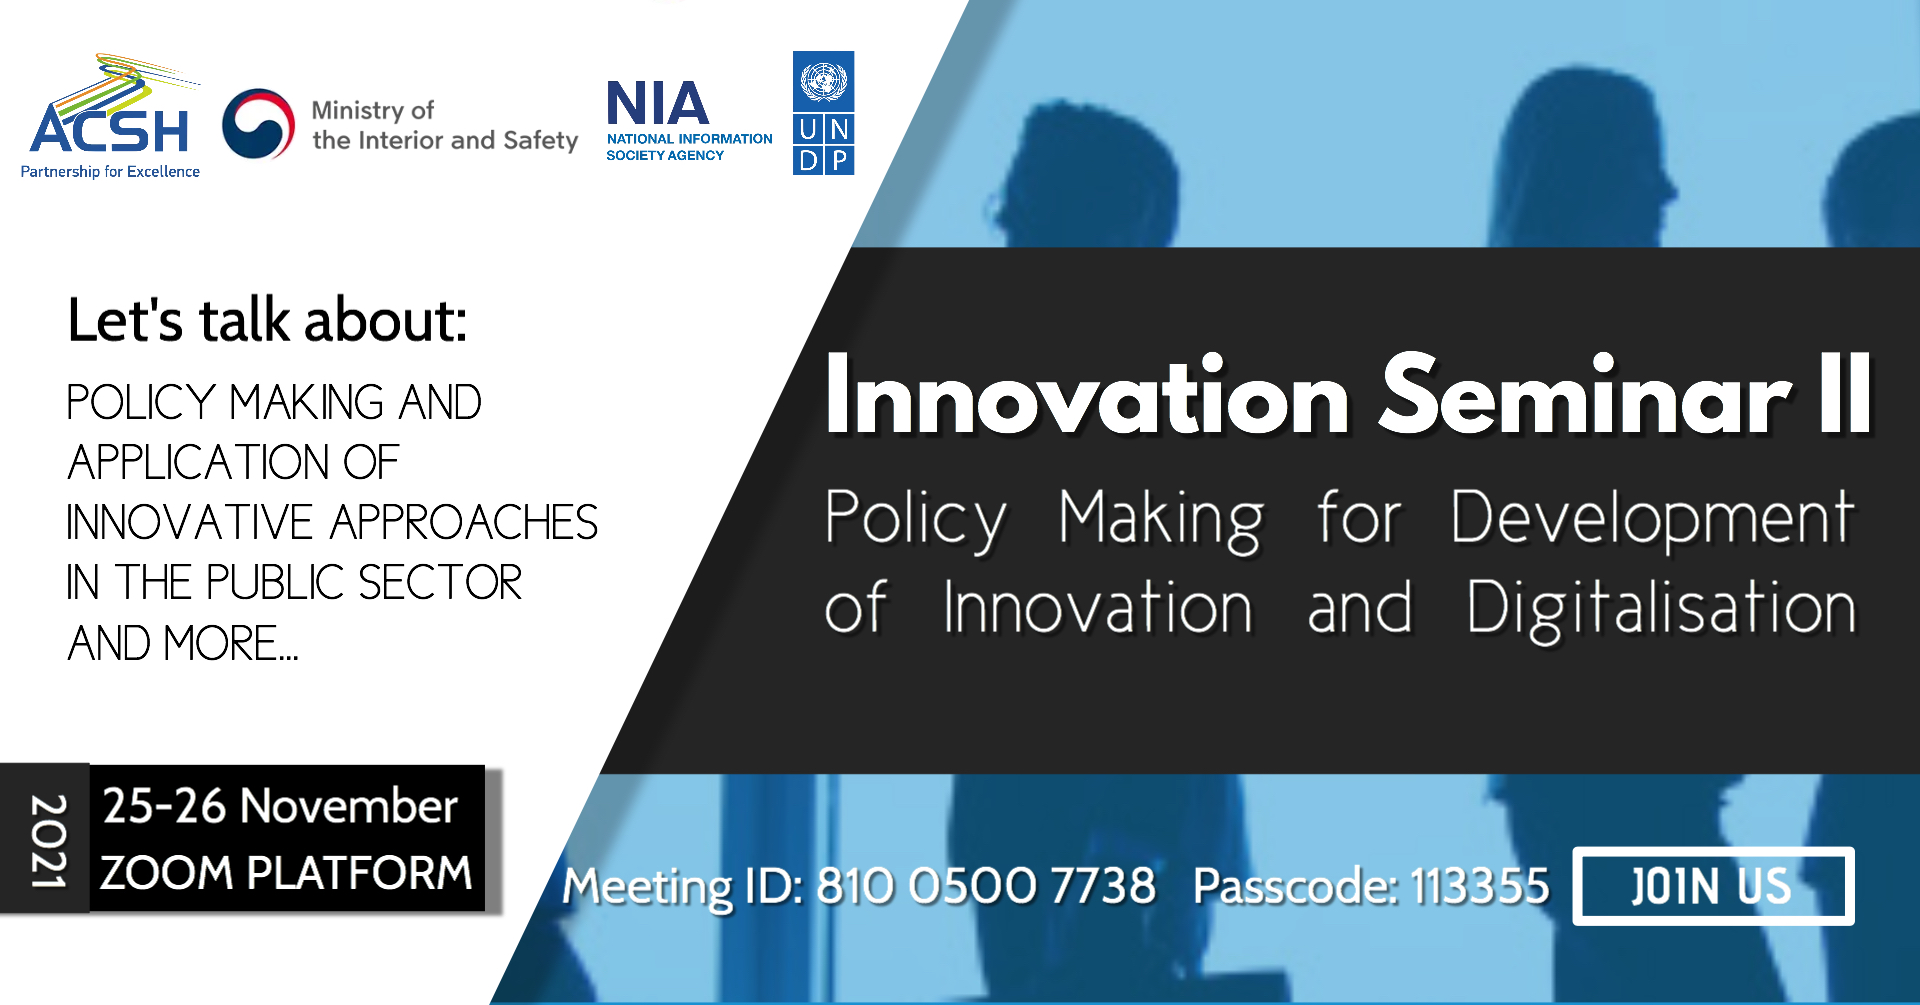 Seminar II on "POLICY MAKING FOR DEVELOPMENT OF INNOVATION AND DIGITALISATION" in the framework of a regional project with the Government of the Republic of Korea